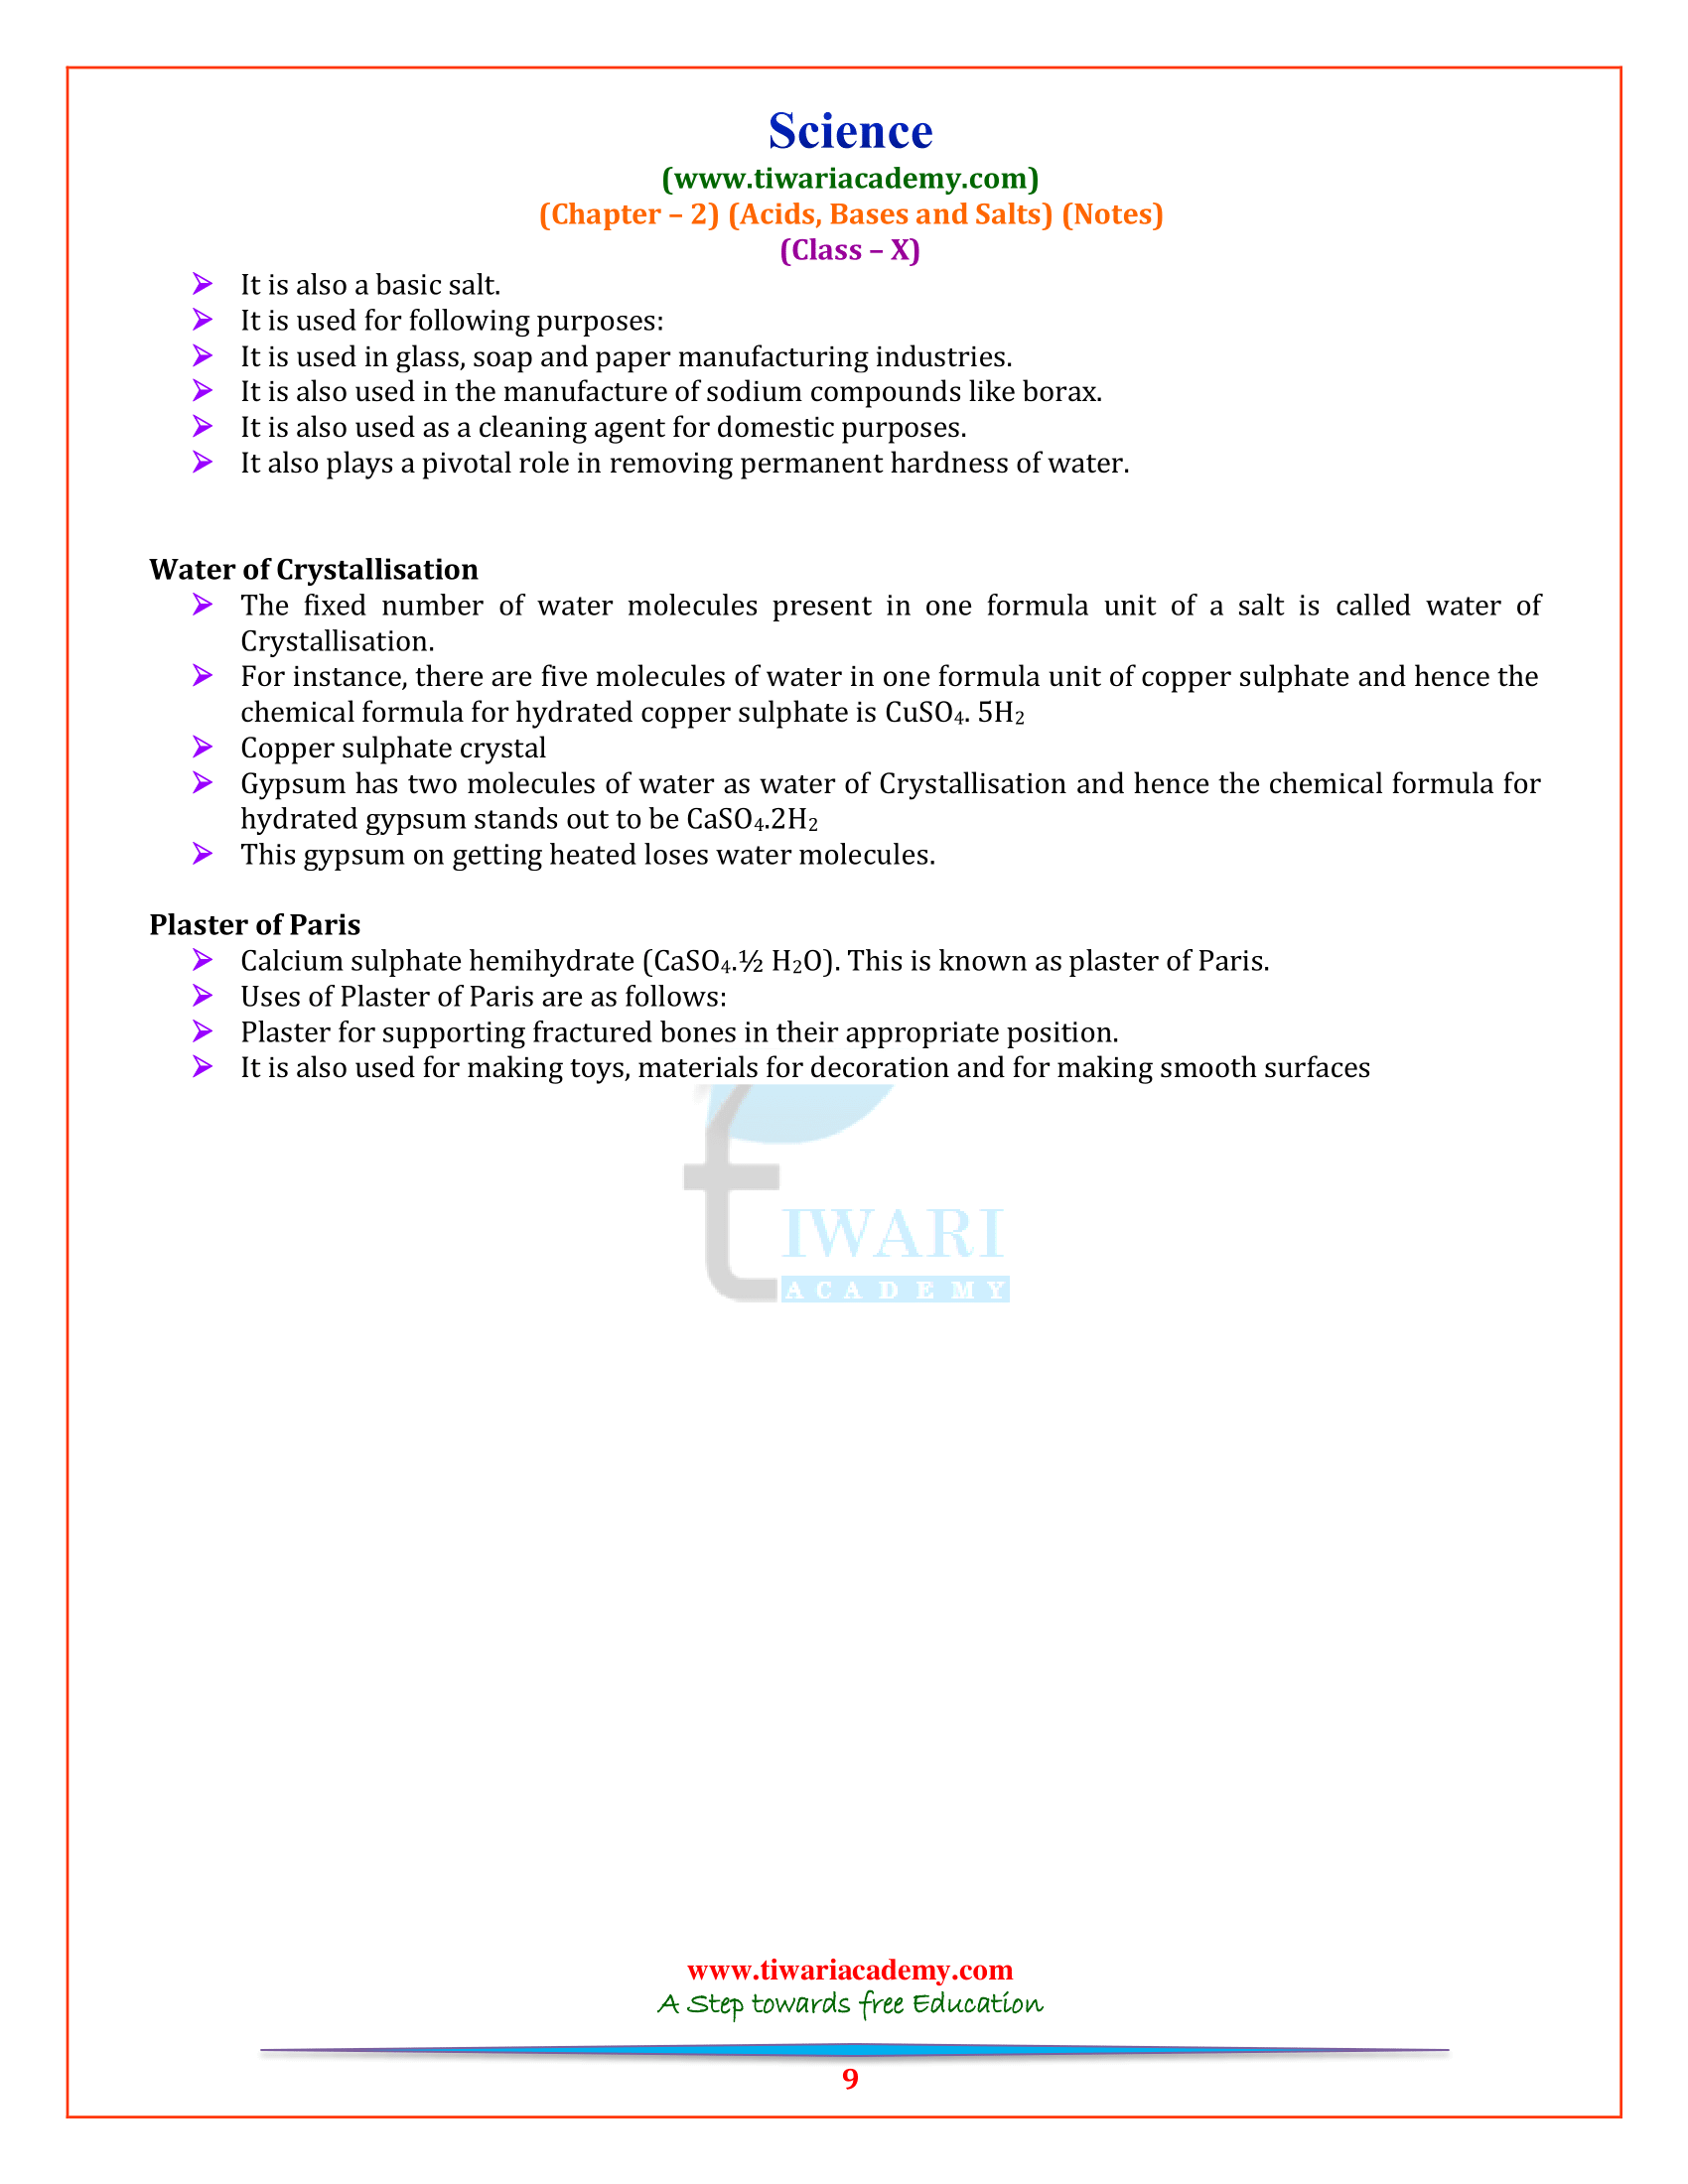 Class 10 Sci. ch. 2 notes